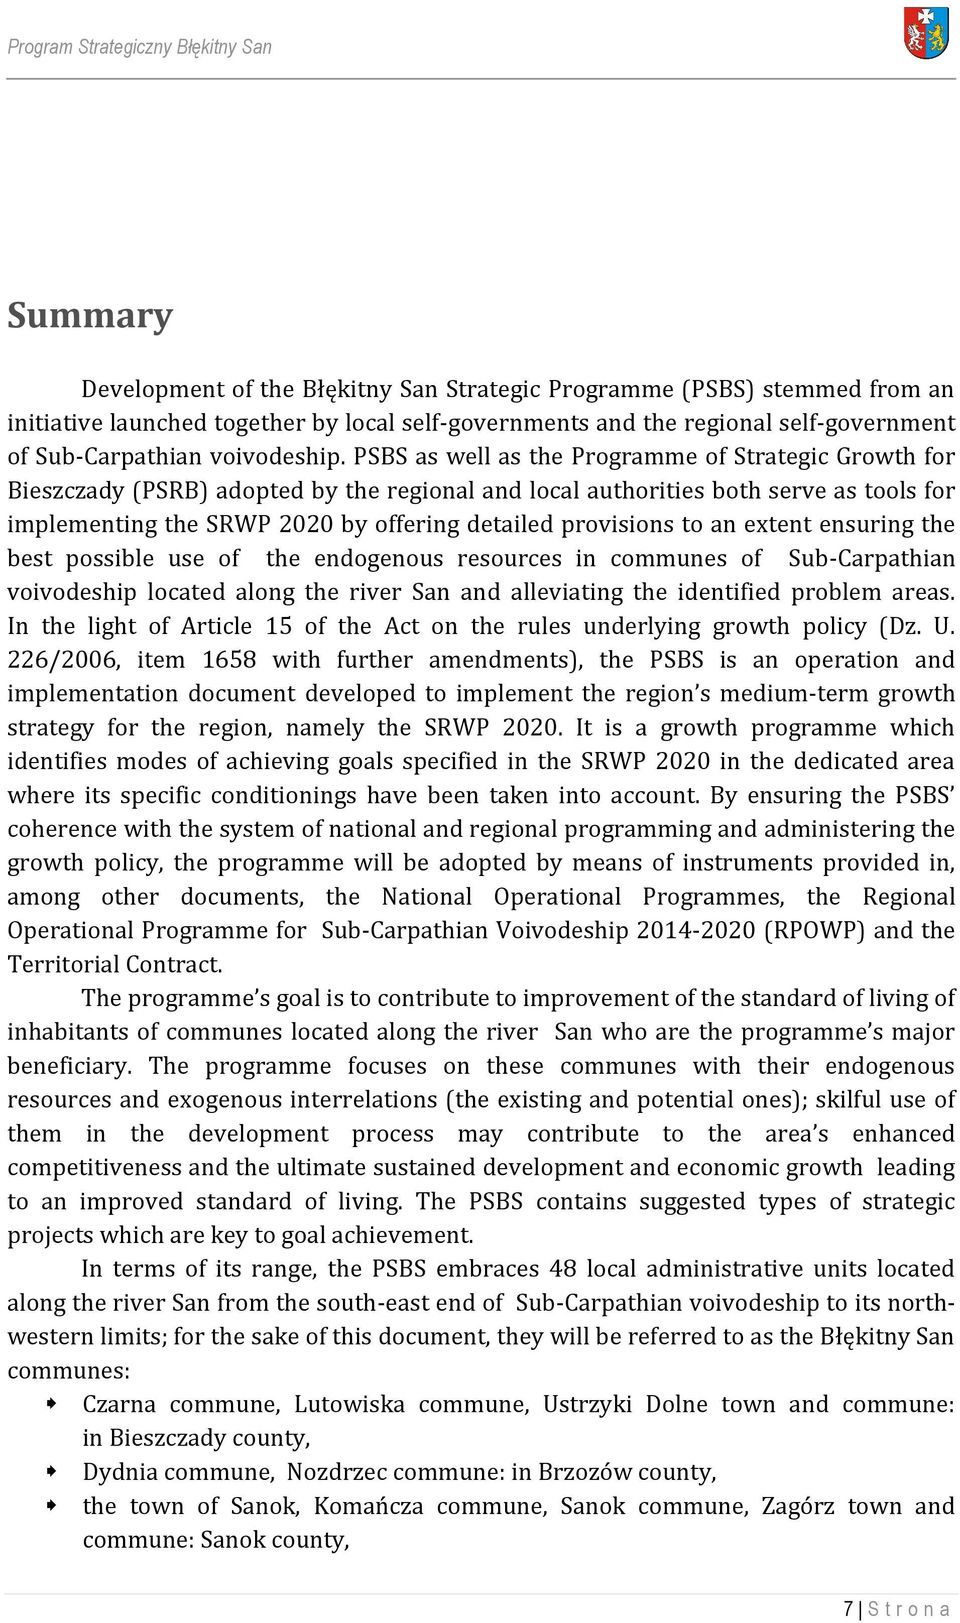 PSBS as well as the Programme of Strategic Growth for Bieszczady (PSRB) adopted by the regional and local authorities both serve as tools for implementing the SRWP 2020 by offering detailed